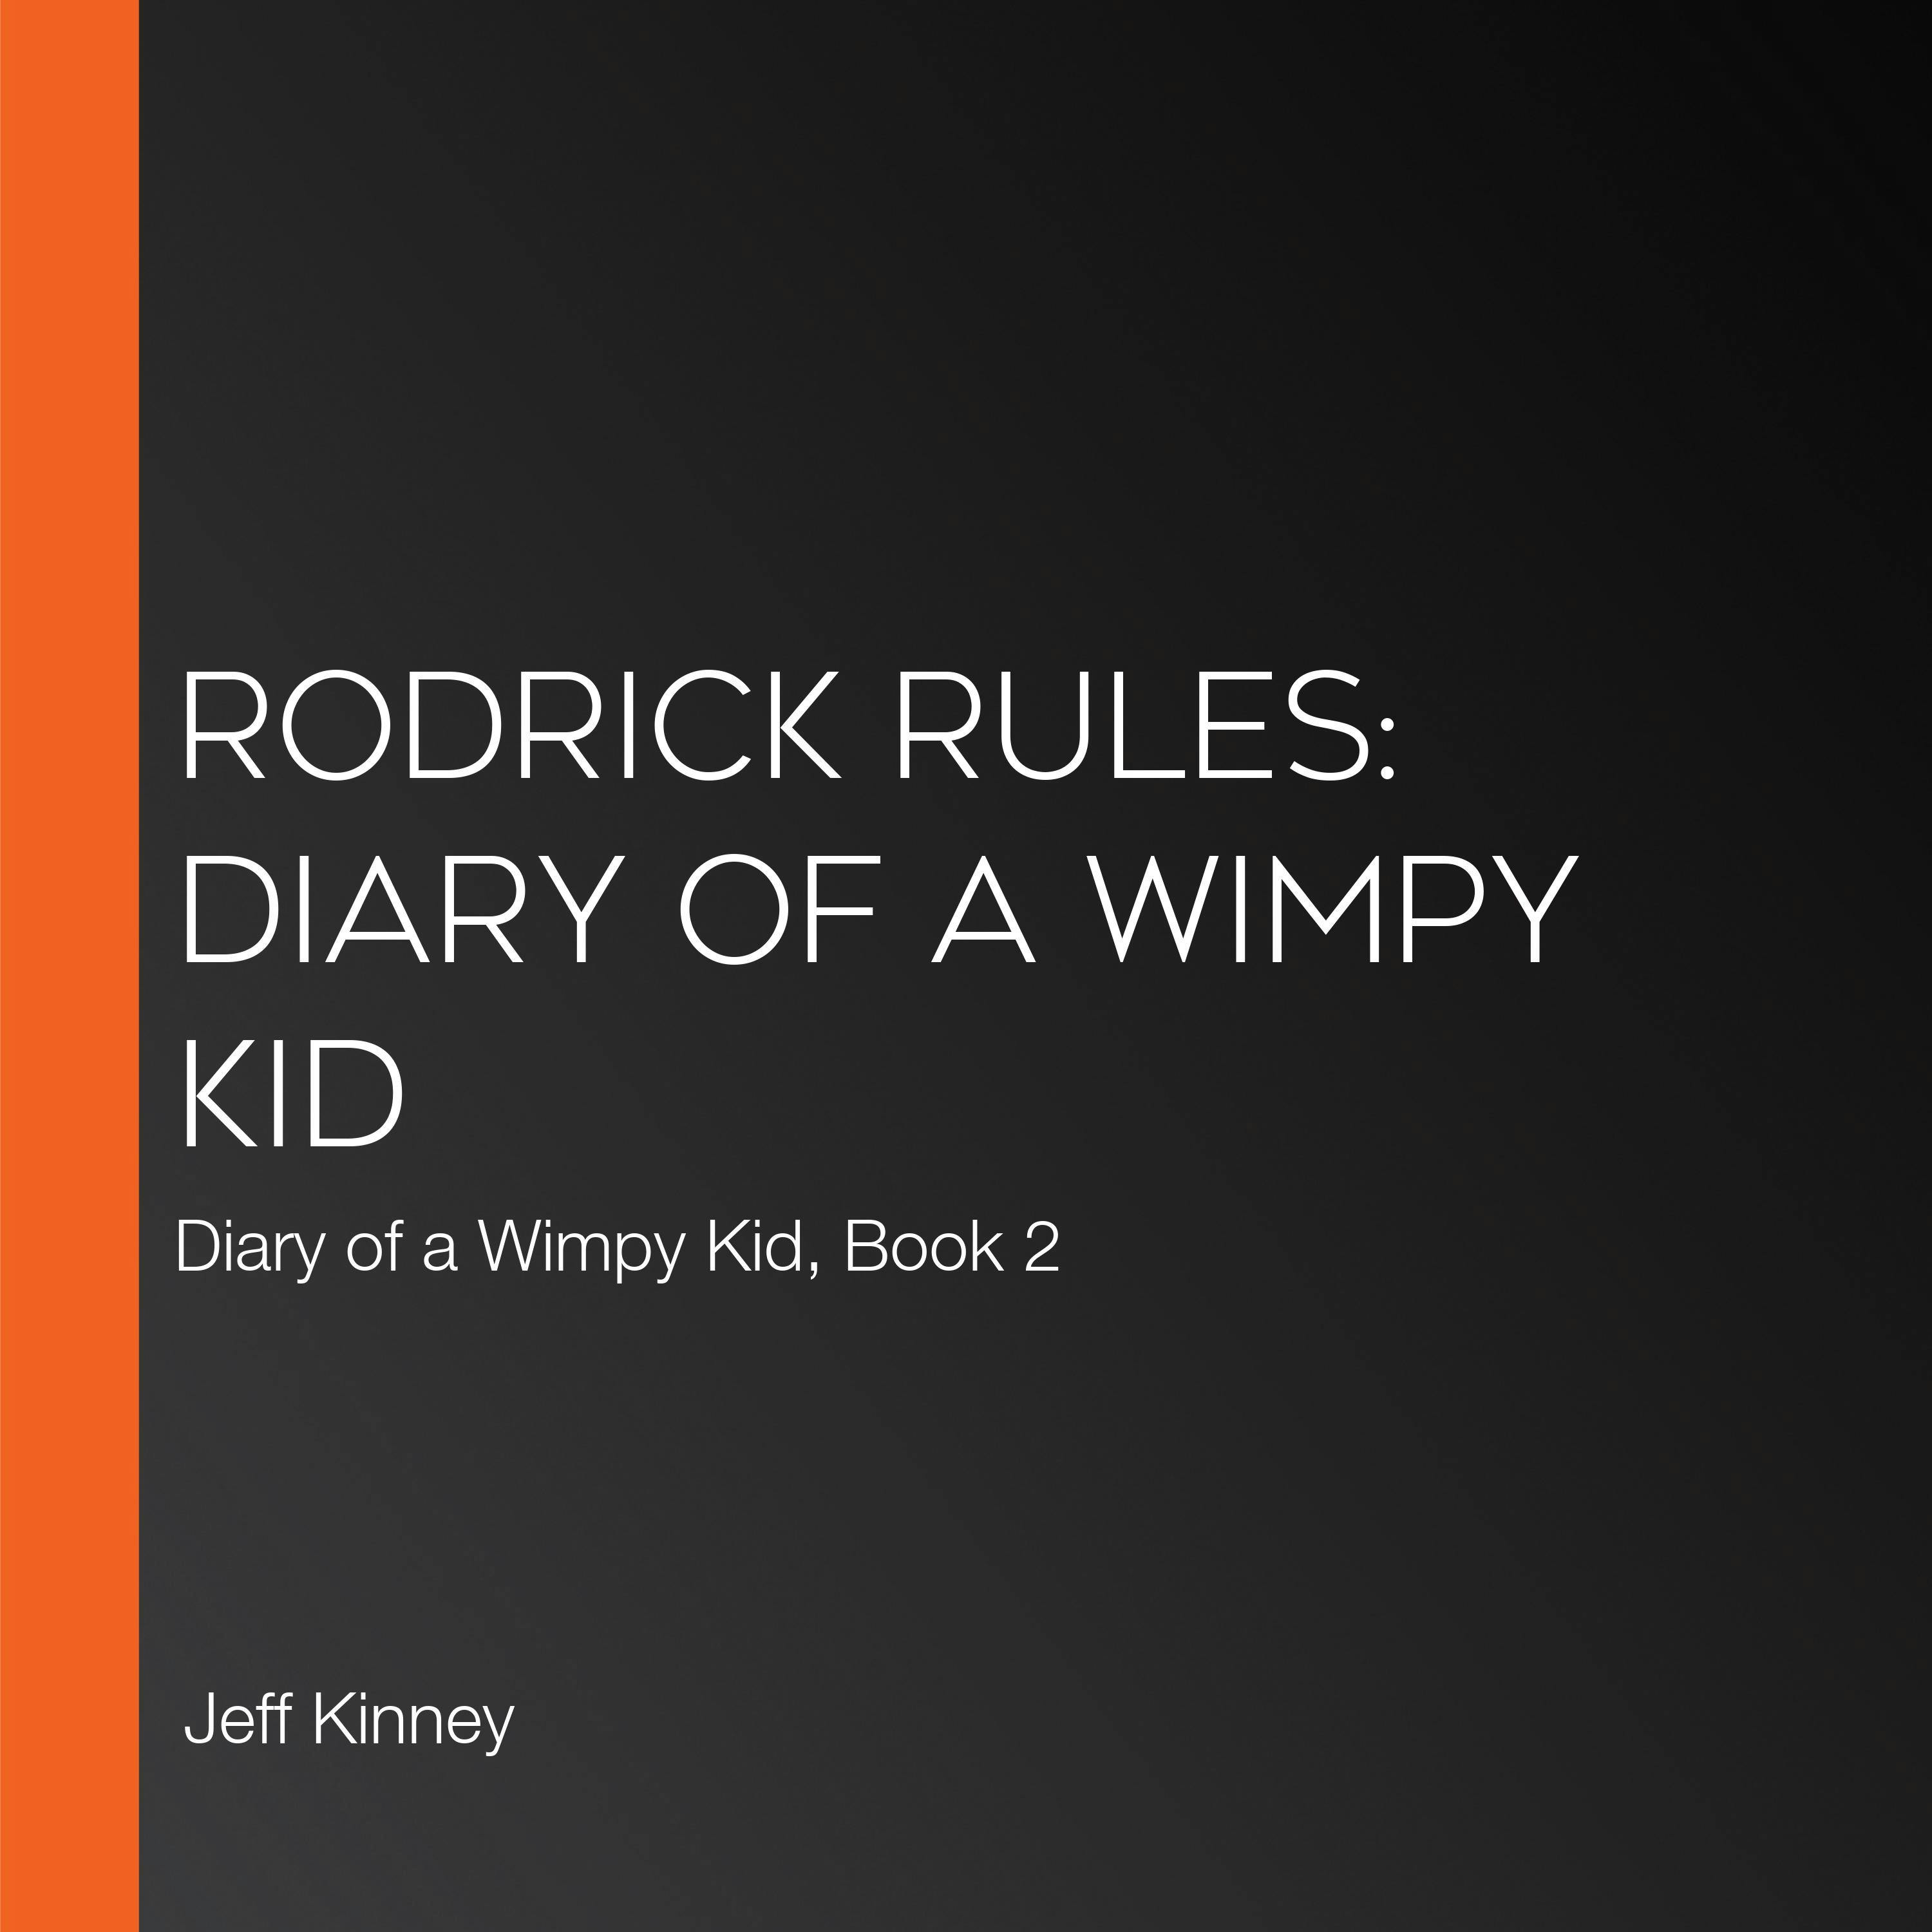 Rodrick Rules: Diary of a Wimpy Kid: Diary of a Wimpy Kid, Book 2 - Jeff Kinney